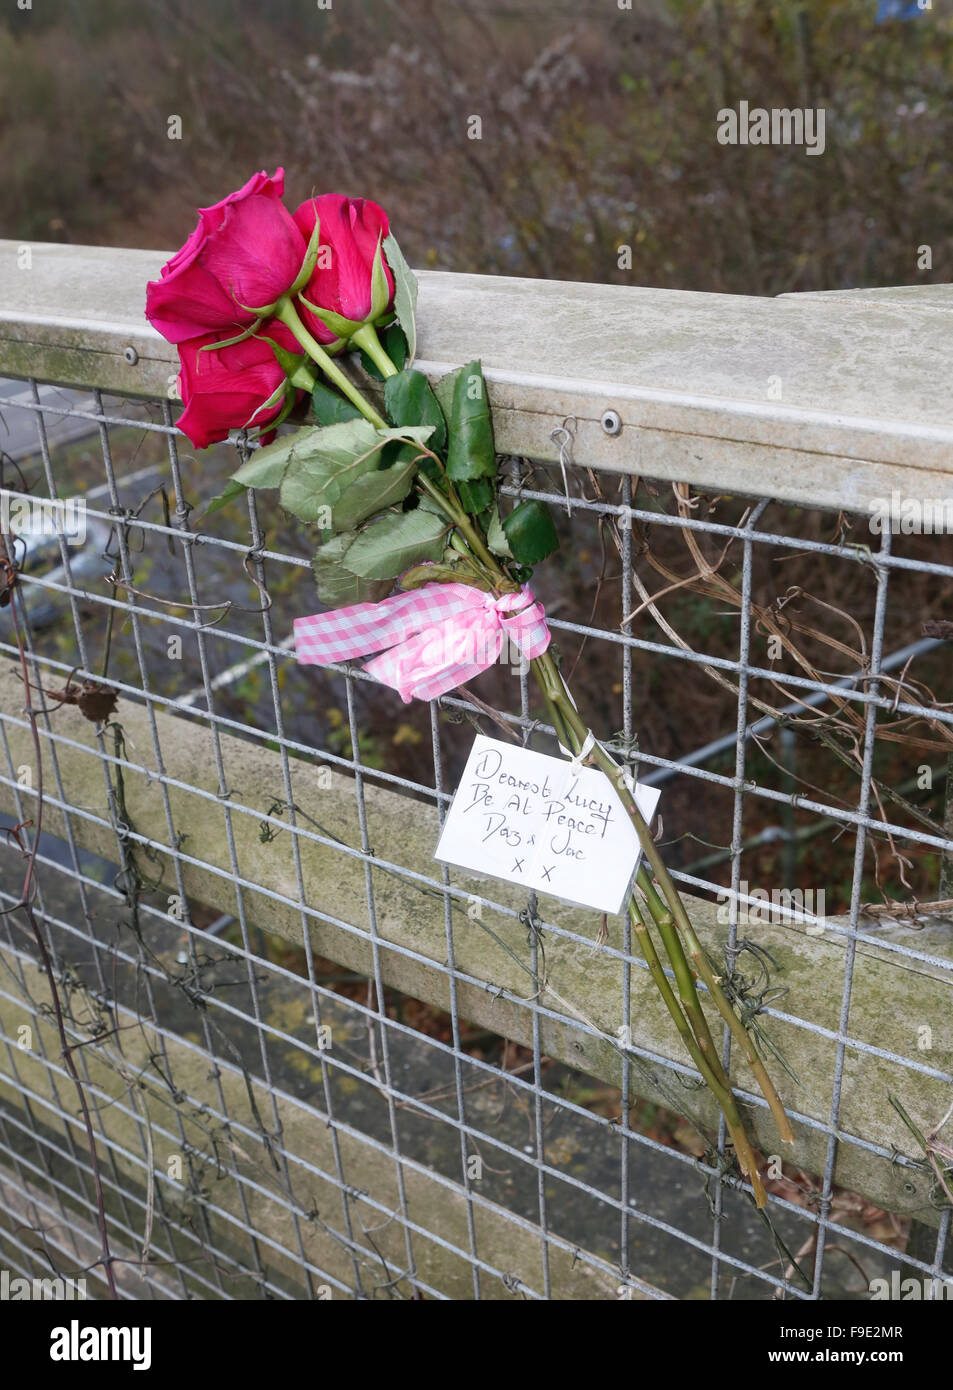 Downend Bridge, Hampshire, UK. 16th Dec, 2015. Attached to Downend Bridge is a single bunch of red roses tied with a pink ribbon, the only reminder of yesterday's tragic accident in which a woman died after falling from the bridge which crosses the M27. The flowers have a small gold card attached to them with the words “Dearest Lucy Be at Peace Daz and Jac XX”, a poignant reminder of a tragic waste of life. Police closed two lanes of the motorway on Tuesday afternoon and motorists endured traffic chaos. Credit:  uknip/Alamy Live News Stock Photo